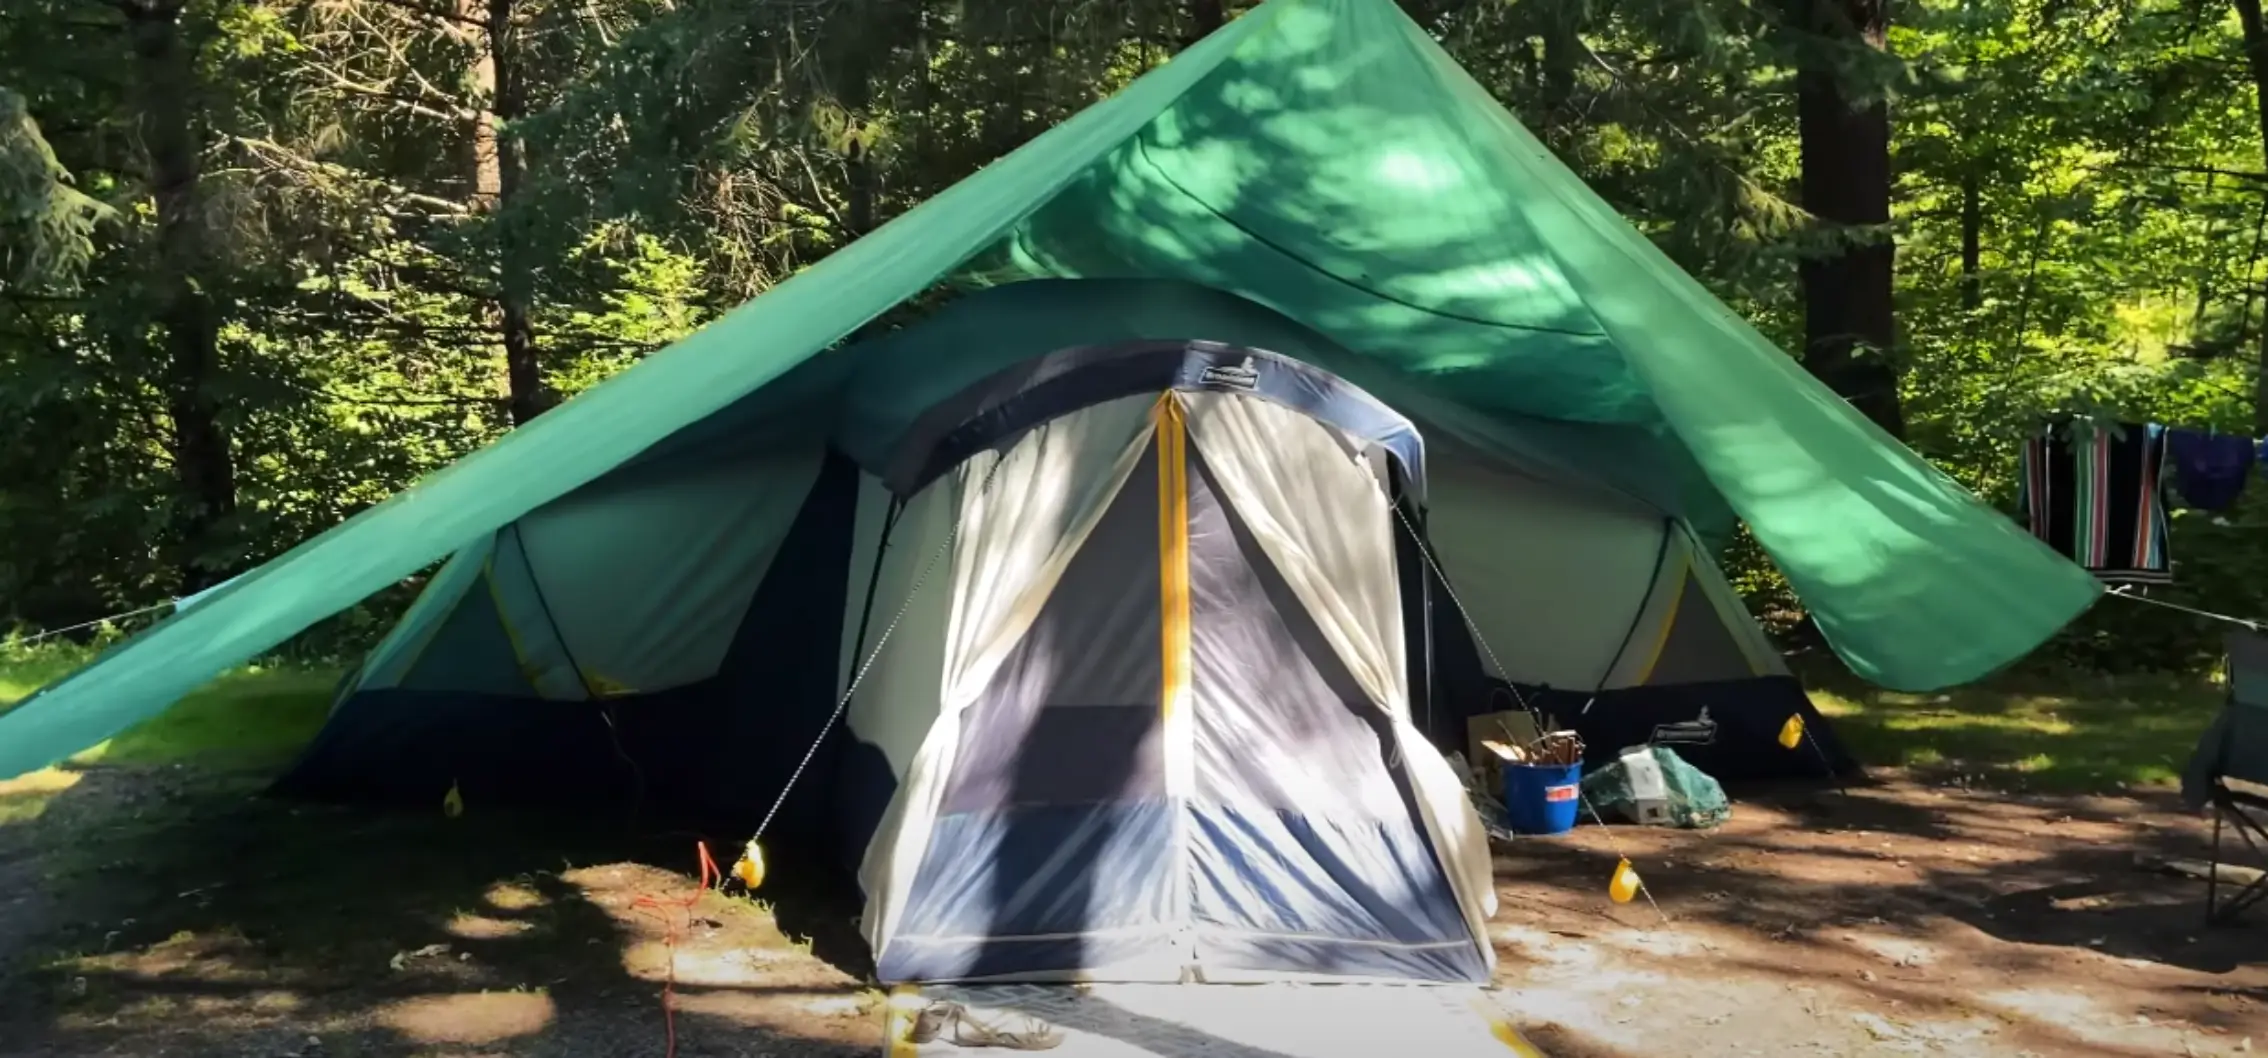 Tent Tarps 7 Reasons & 3 Benefits Tips on Setting One Up